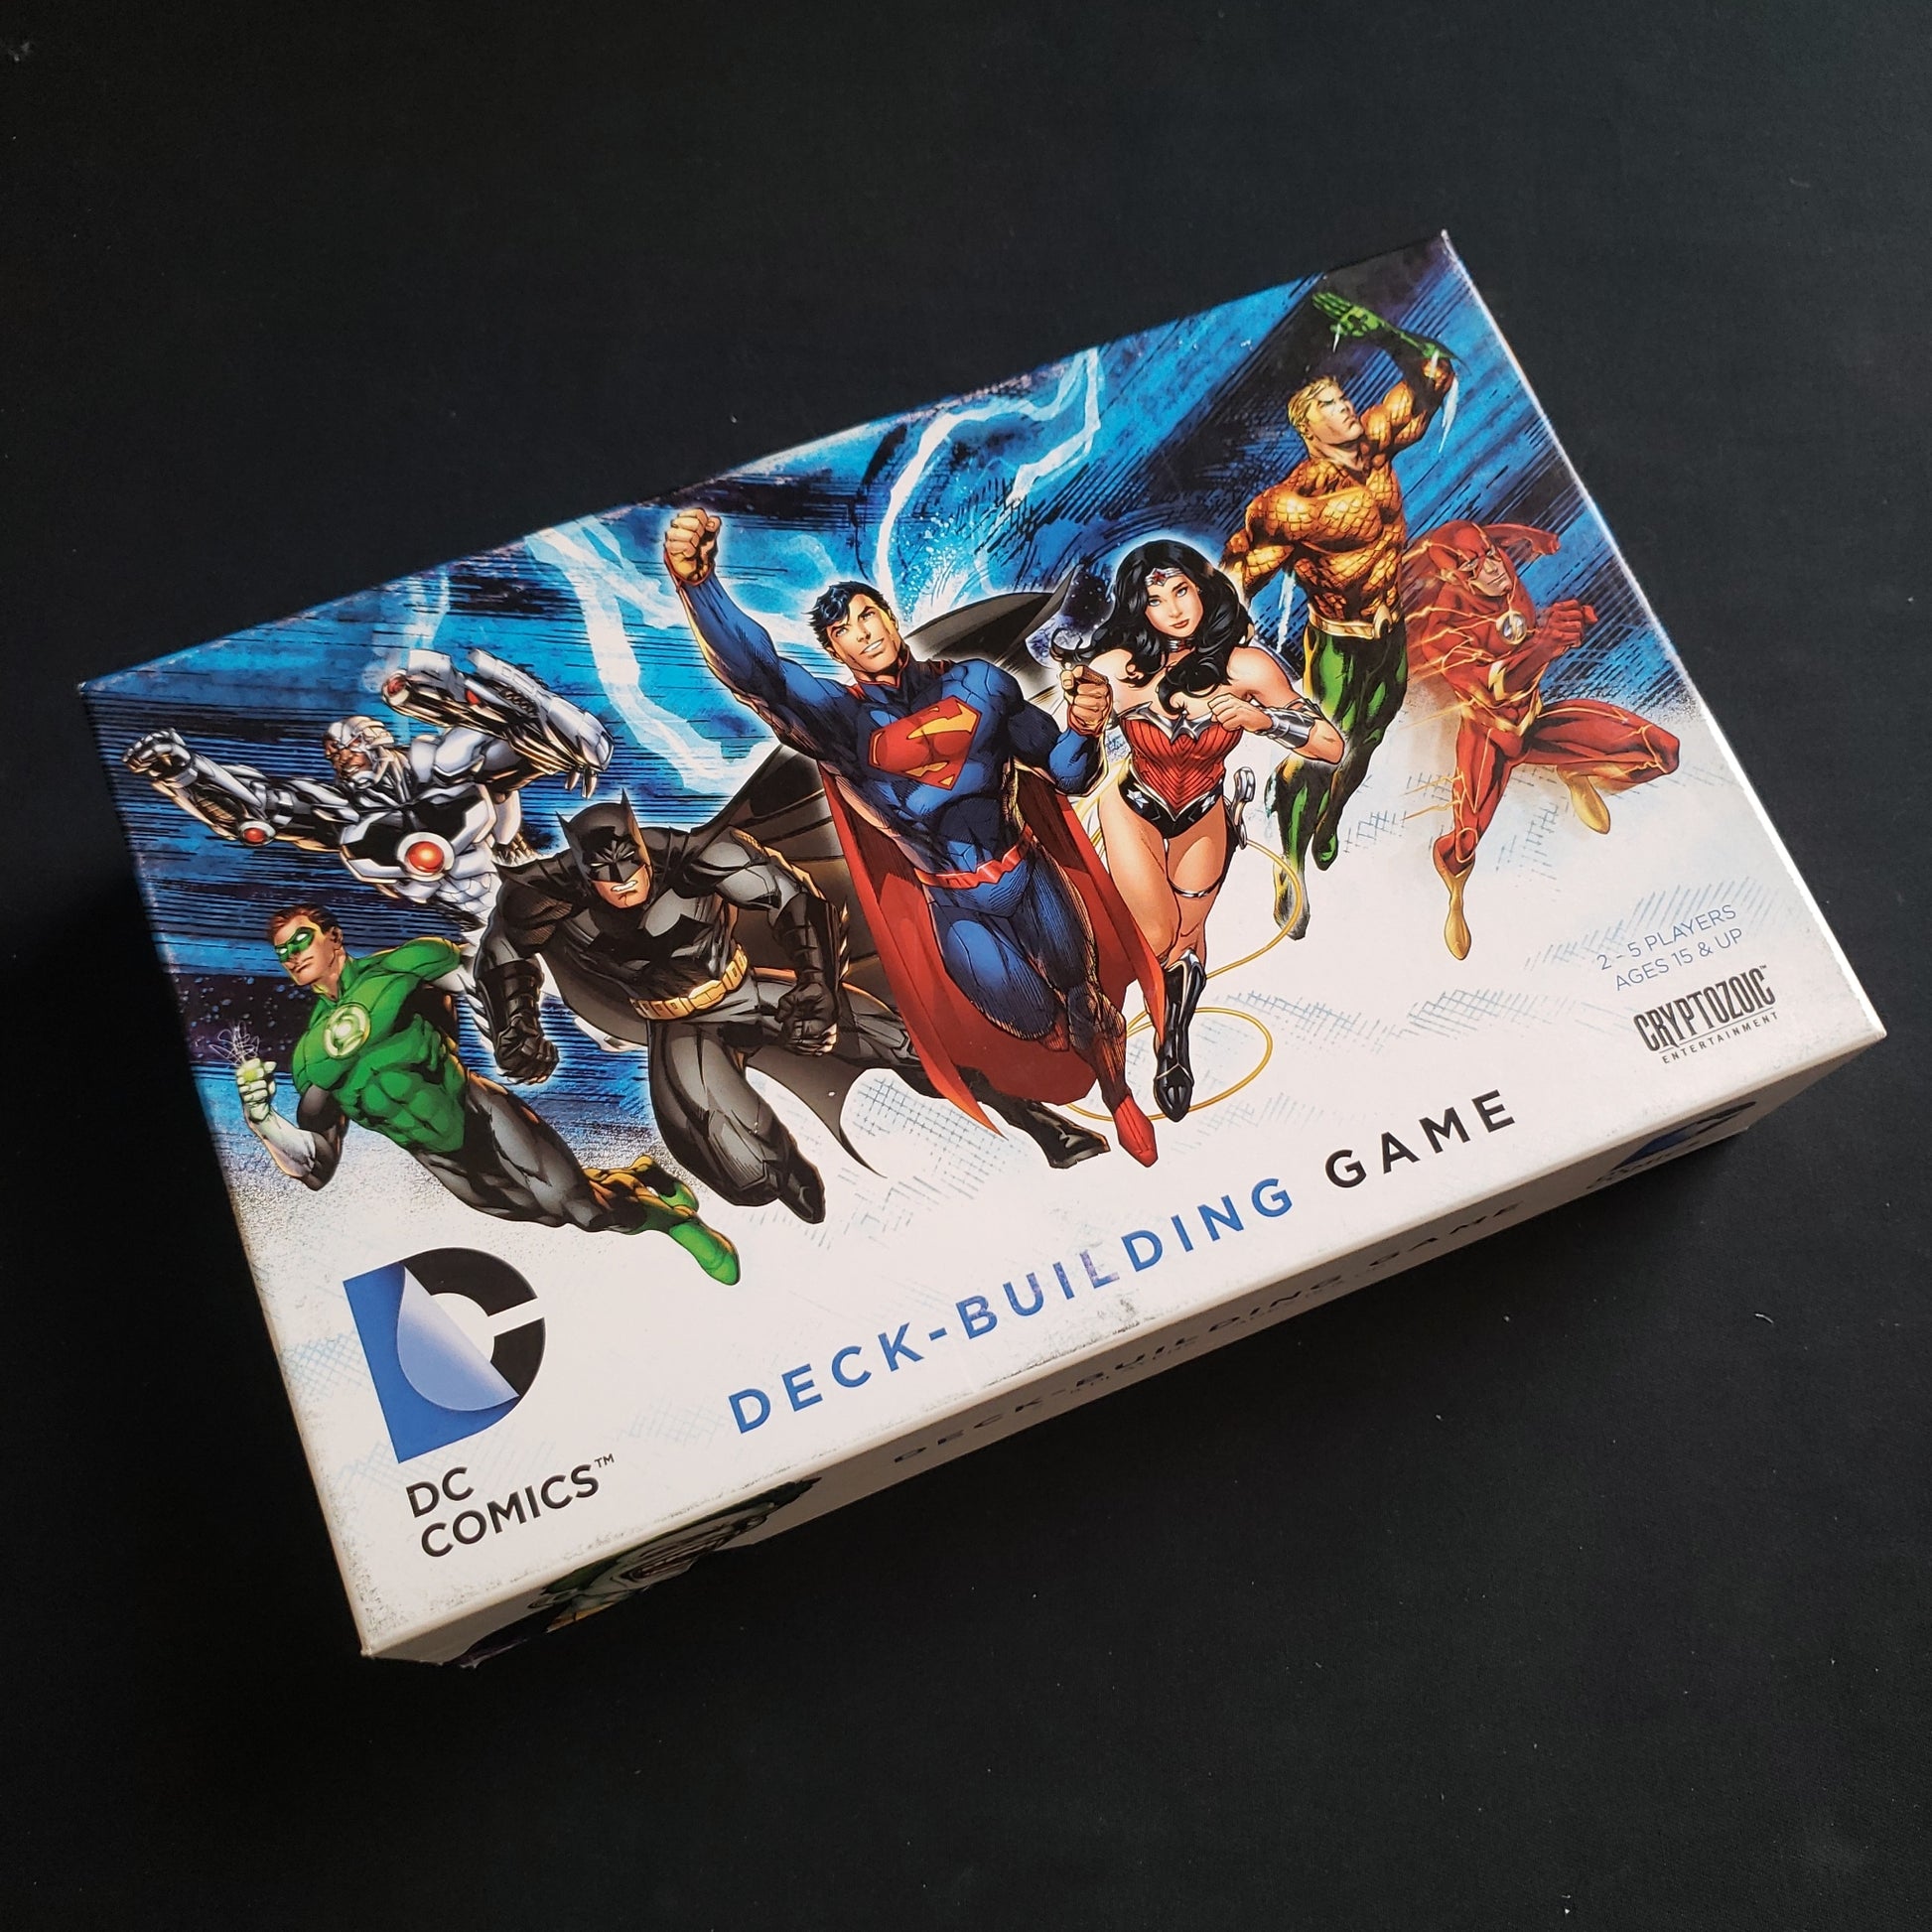 Image shows the front cover of the box of the DC Comics Deckbuilding card game